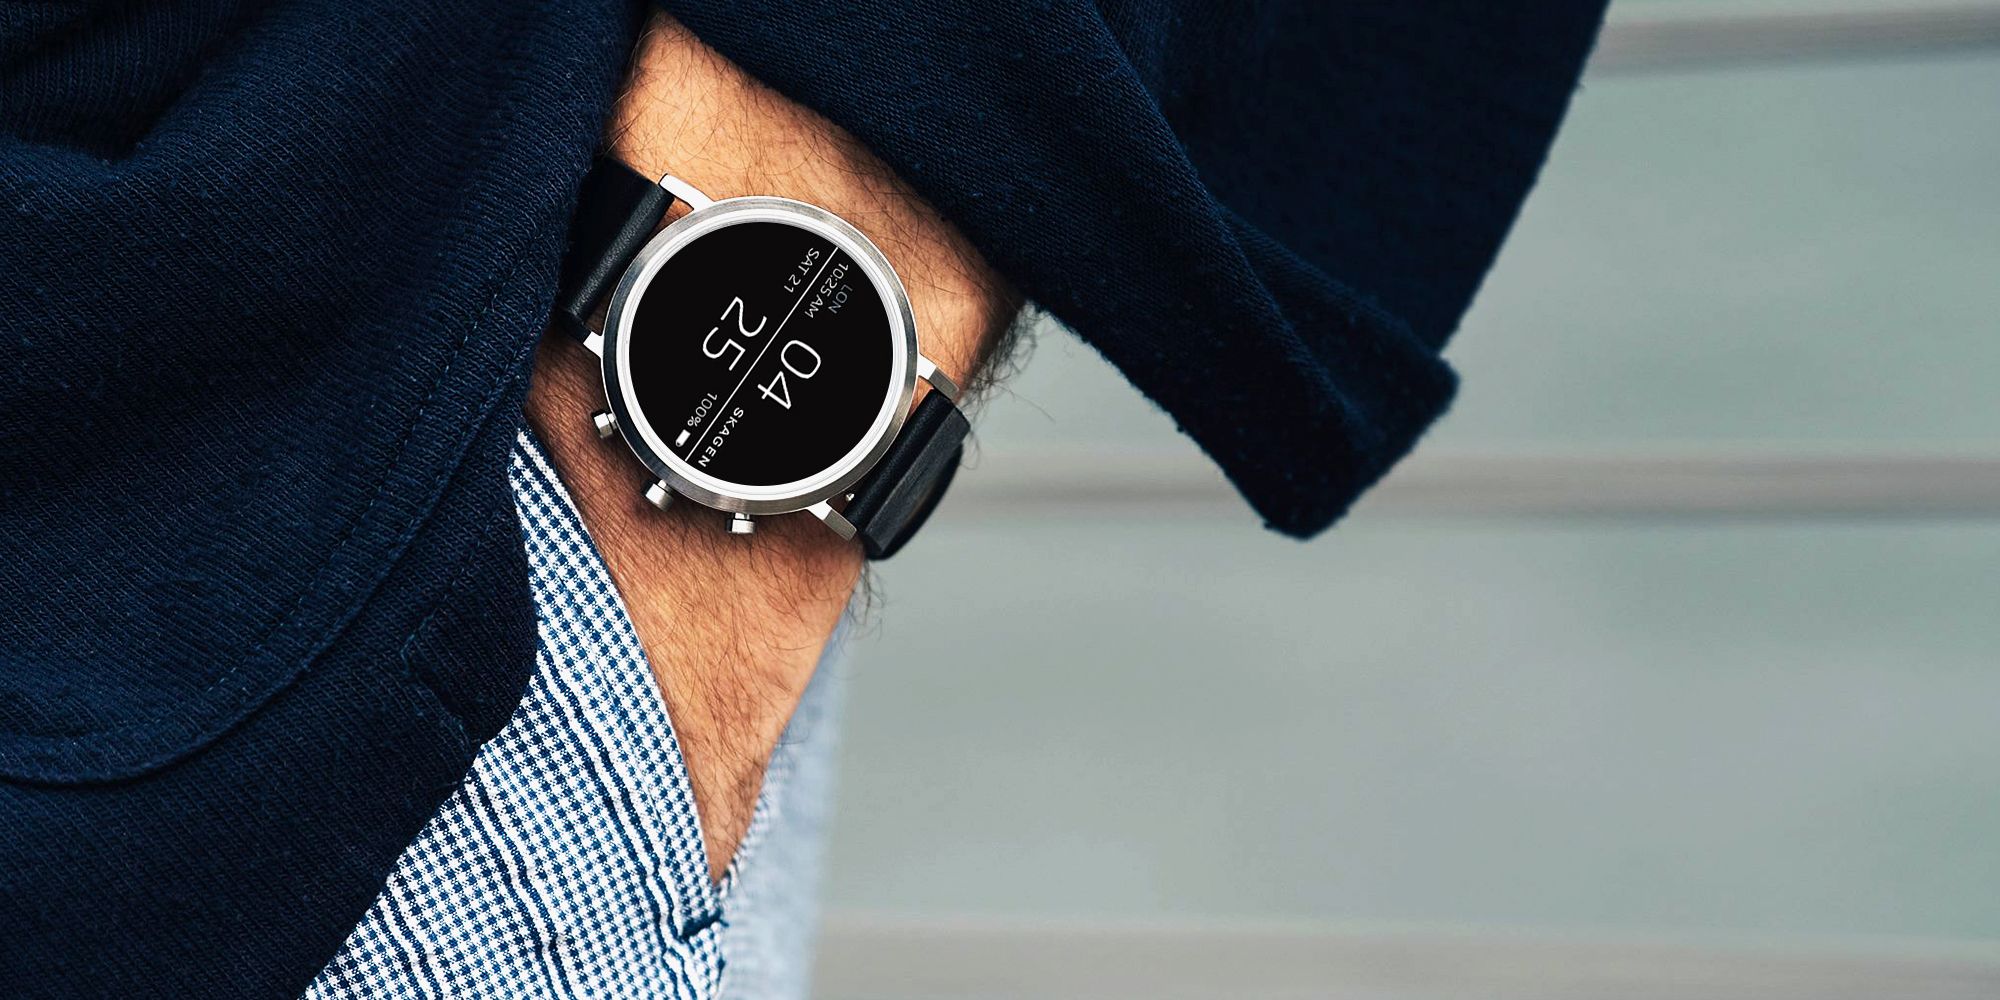 Best Wear Smartwatches of - Android Smartwatch Reviews